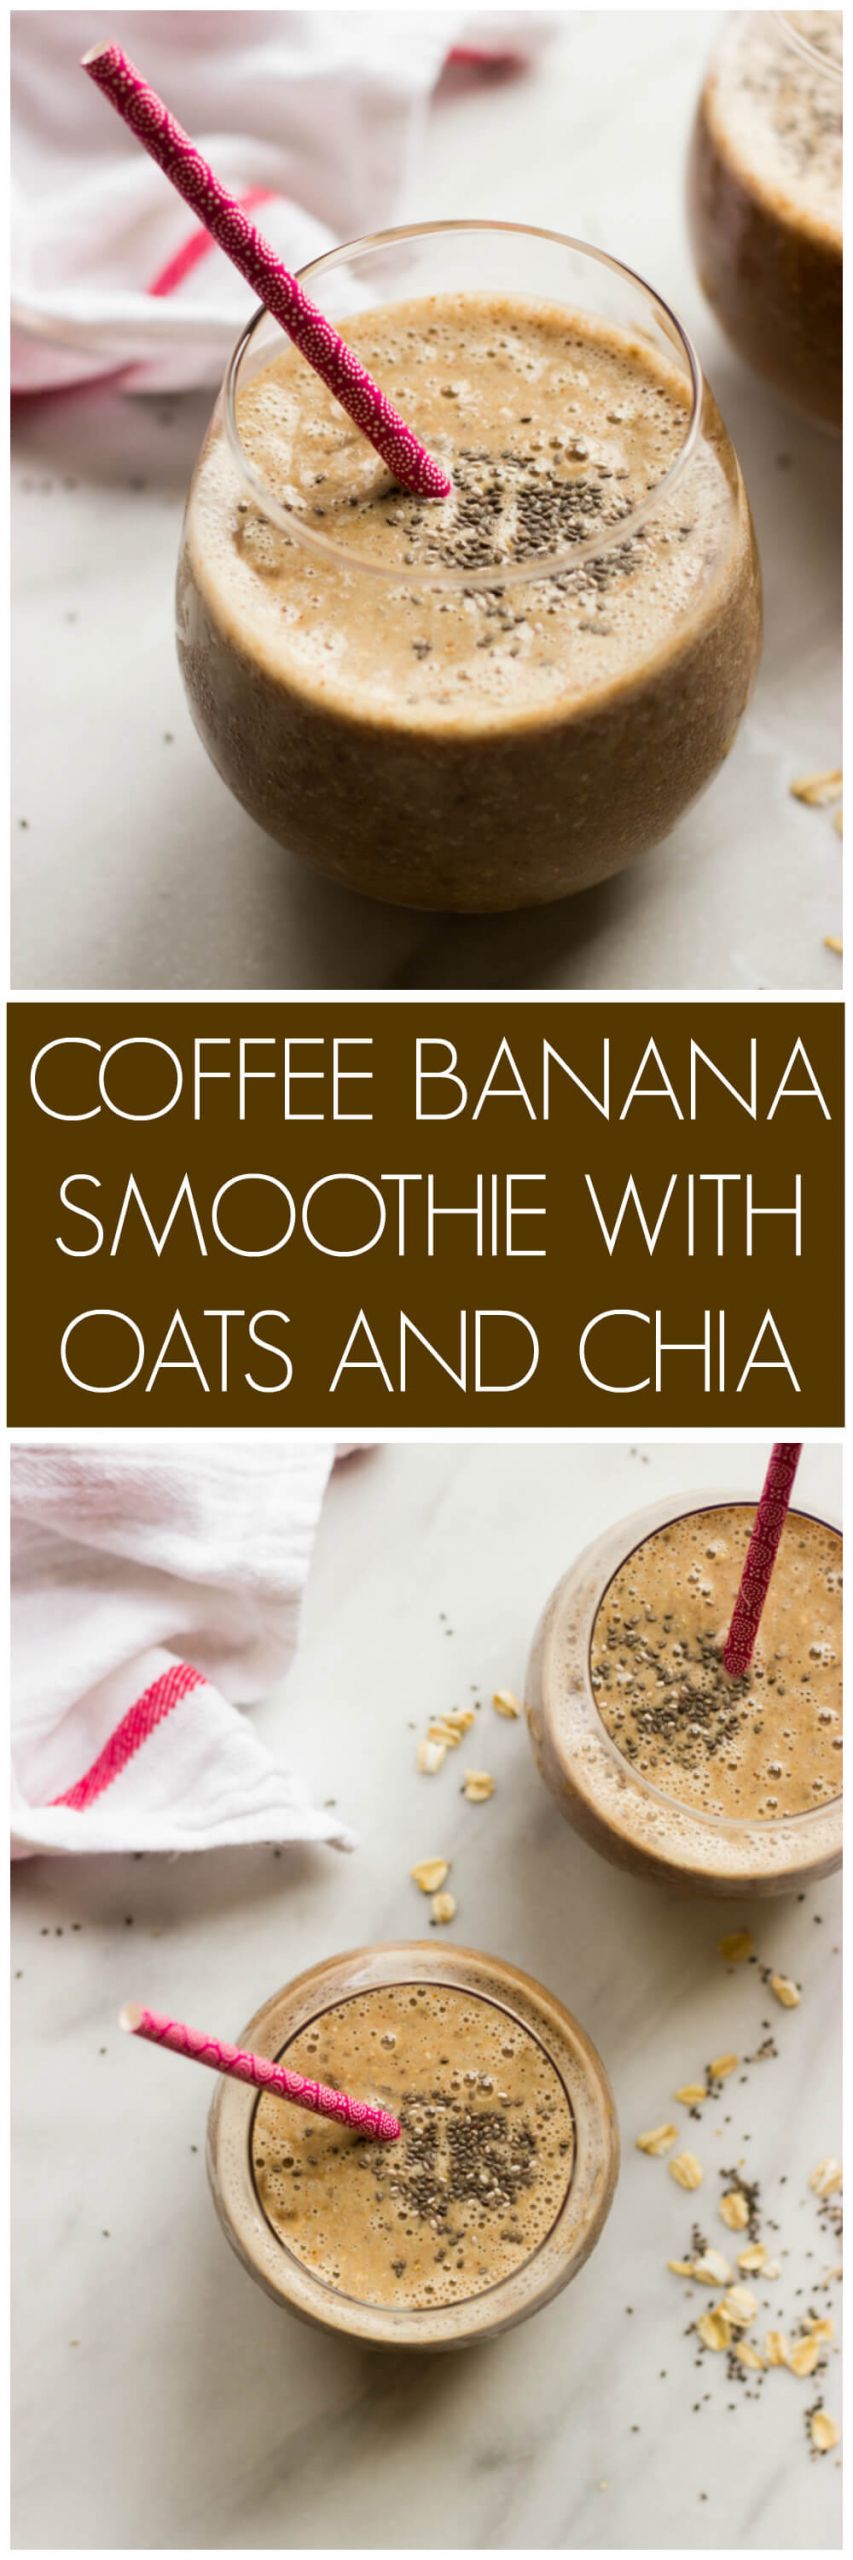 Oats In Smoothie
 Coffee Banana Smoothie with Oats and Chia Little Broken